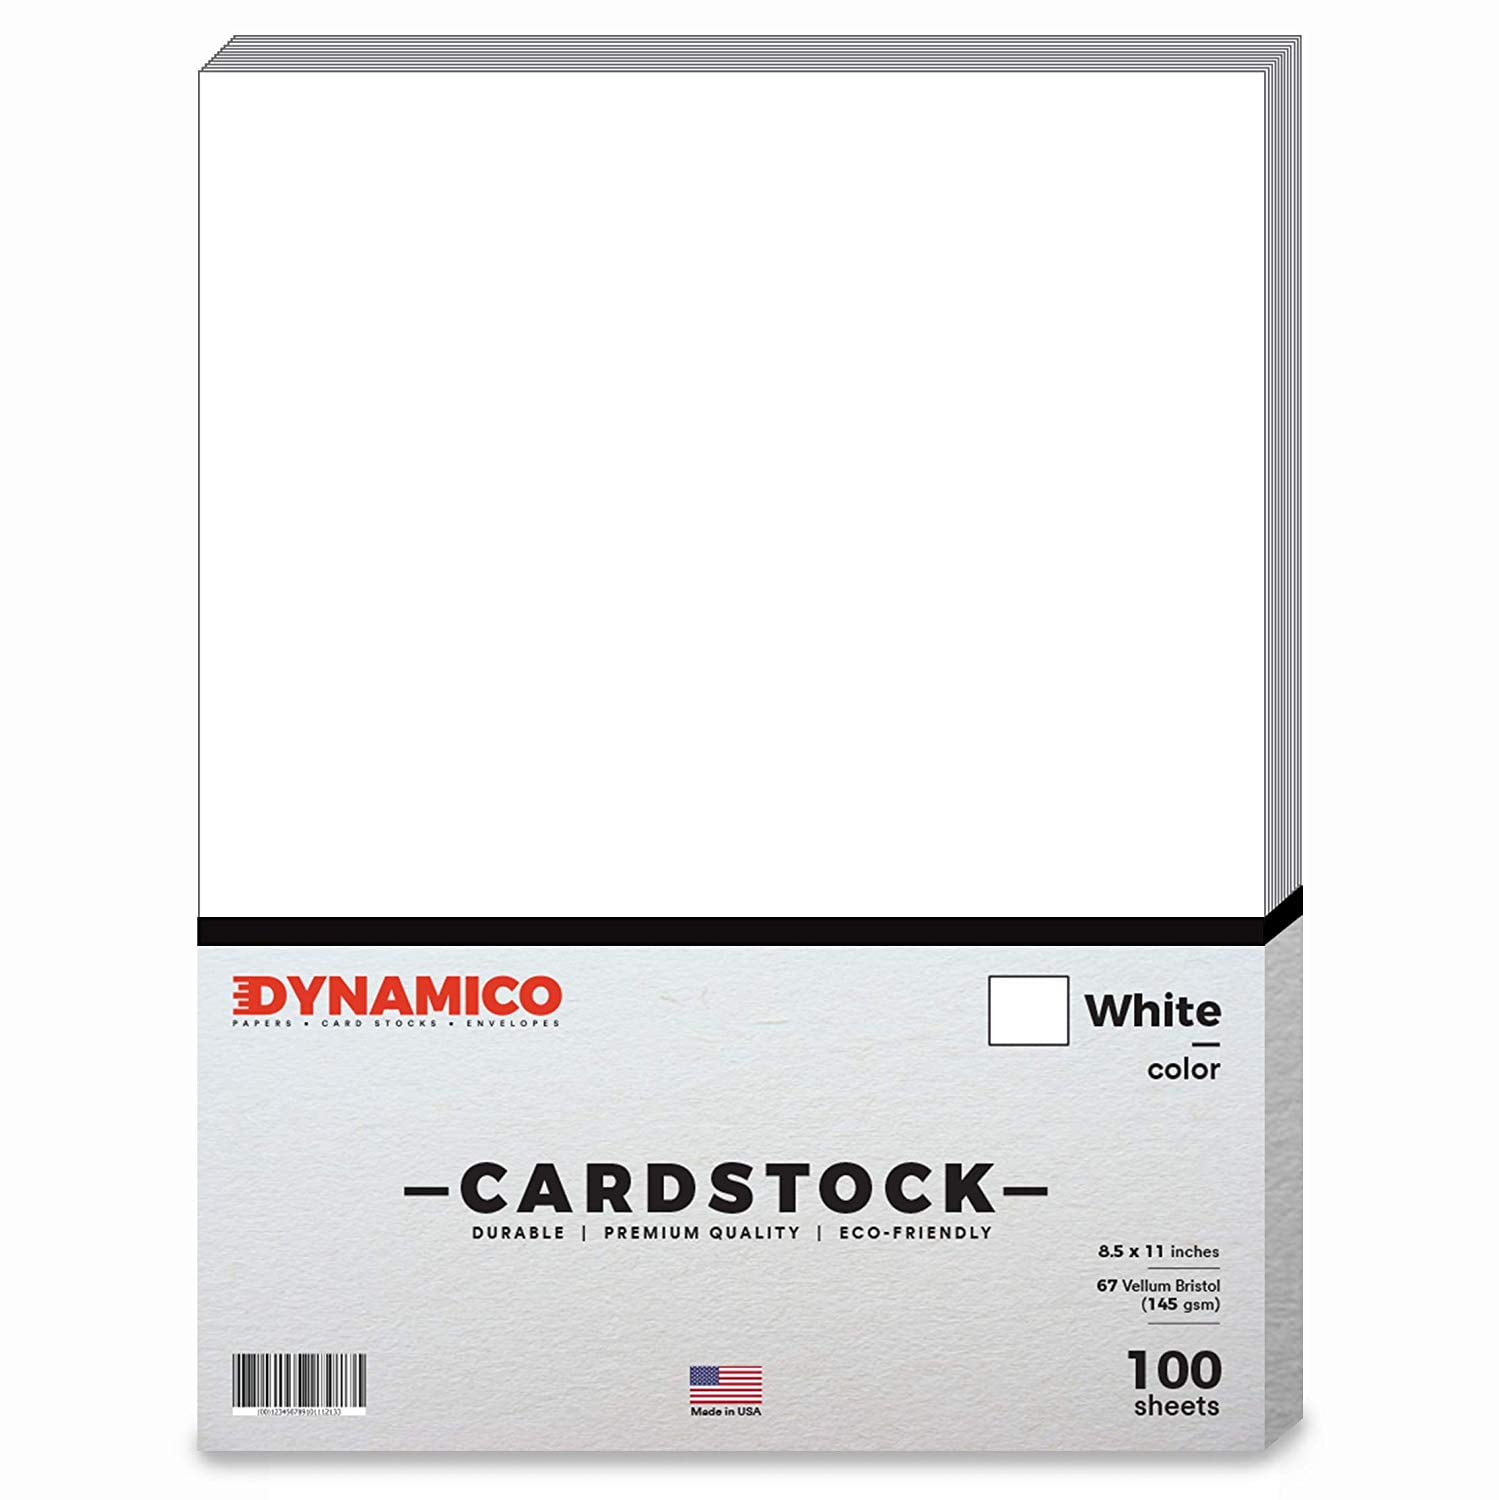 White 8.5 x 11 inch Pastel Color Cardstock Paper - for Cards and Stationery Printing | Medium to Light Weight Card Stock 67 lb Vellum Bristol | 100